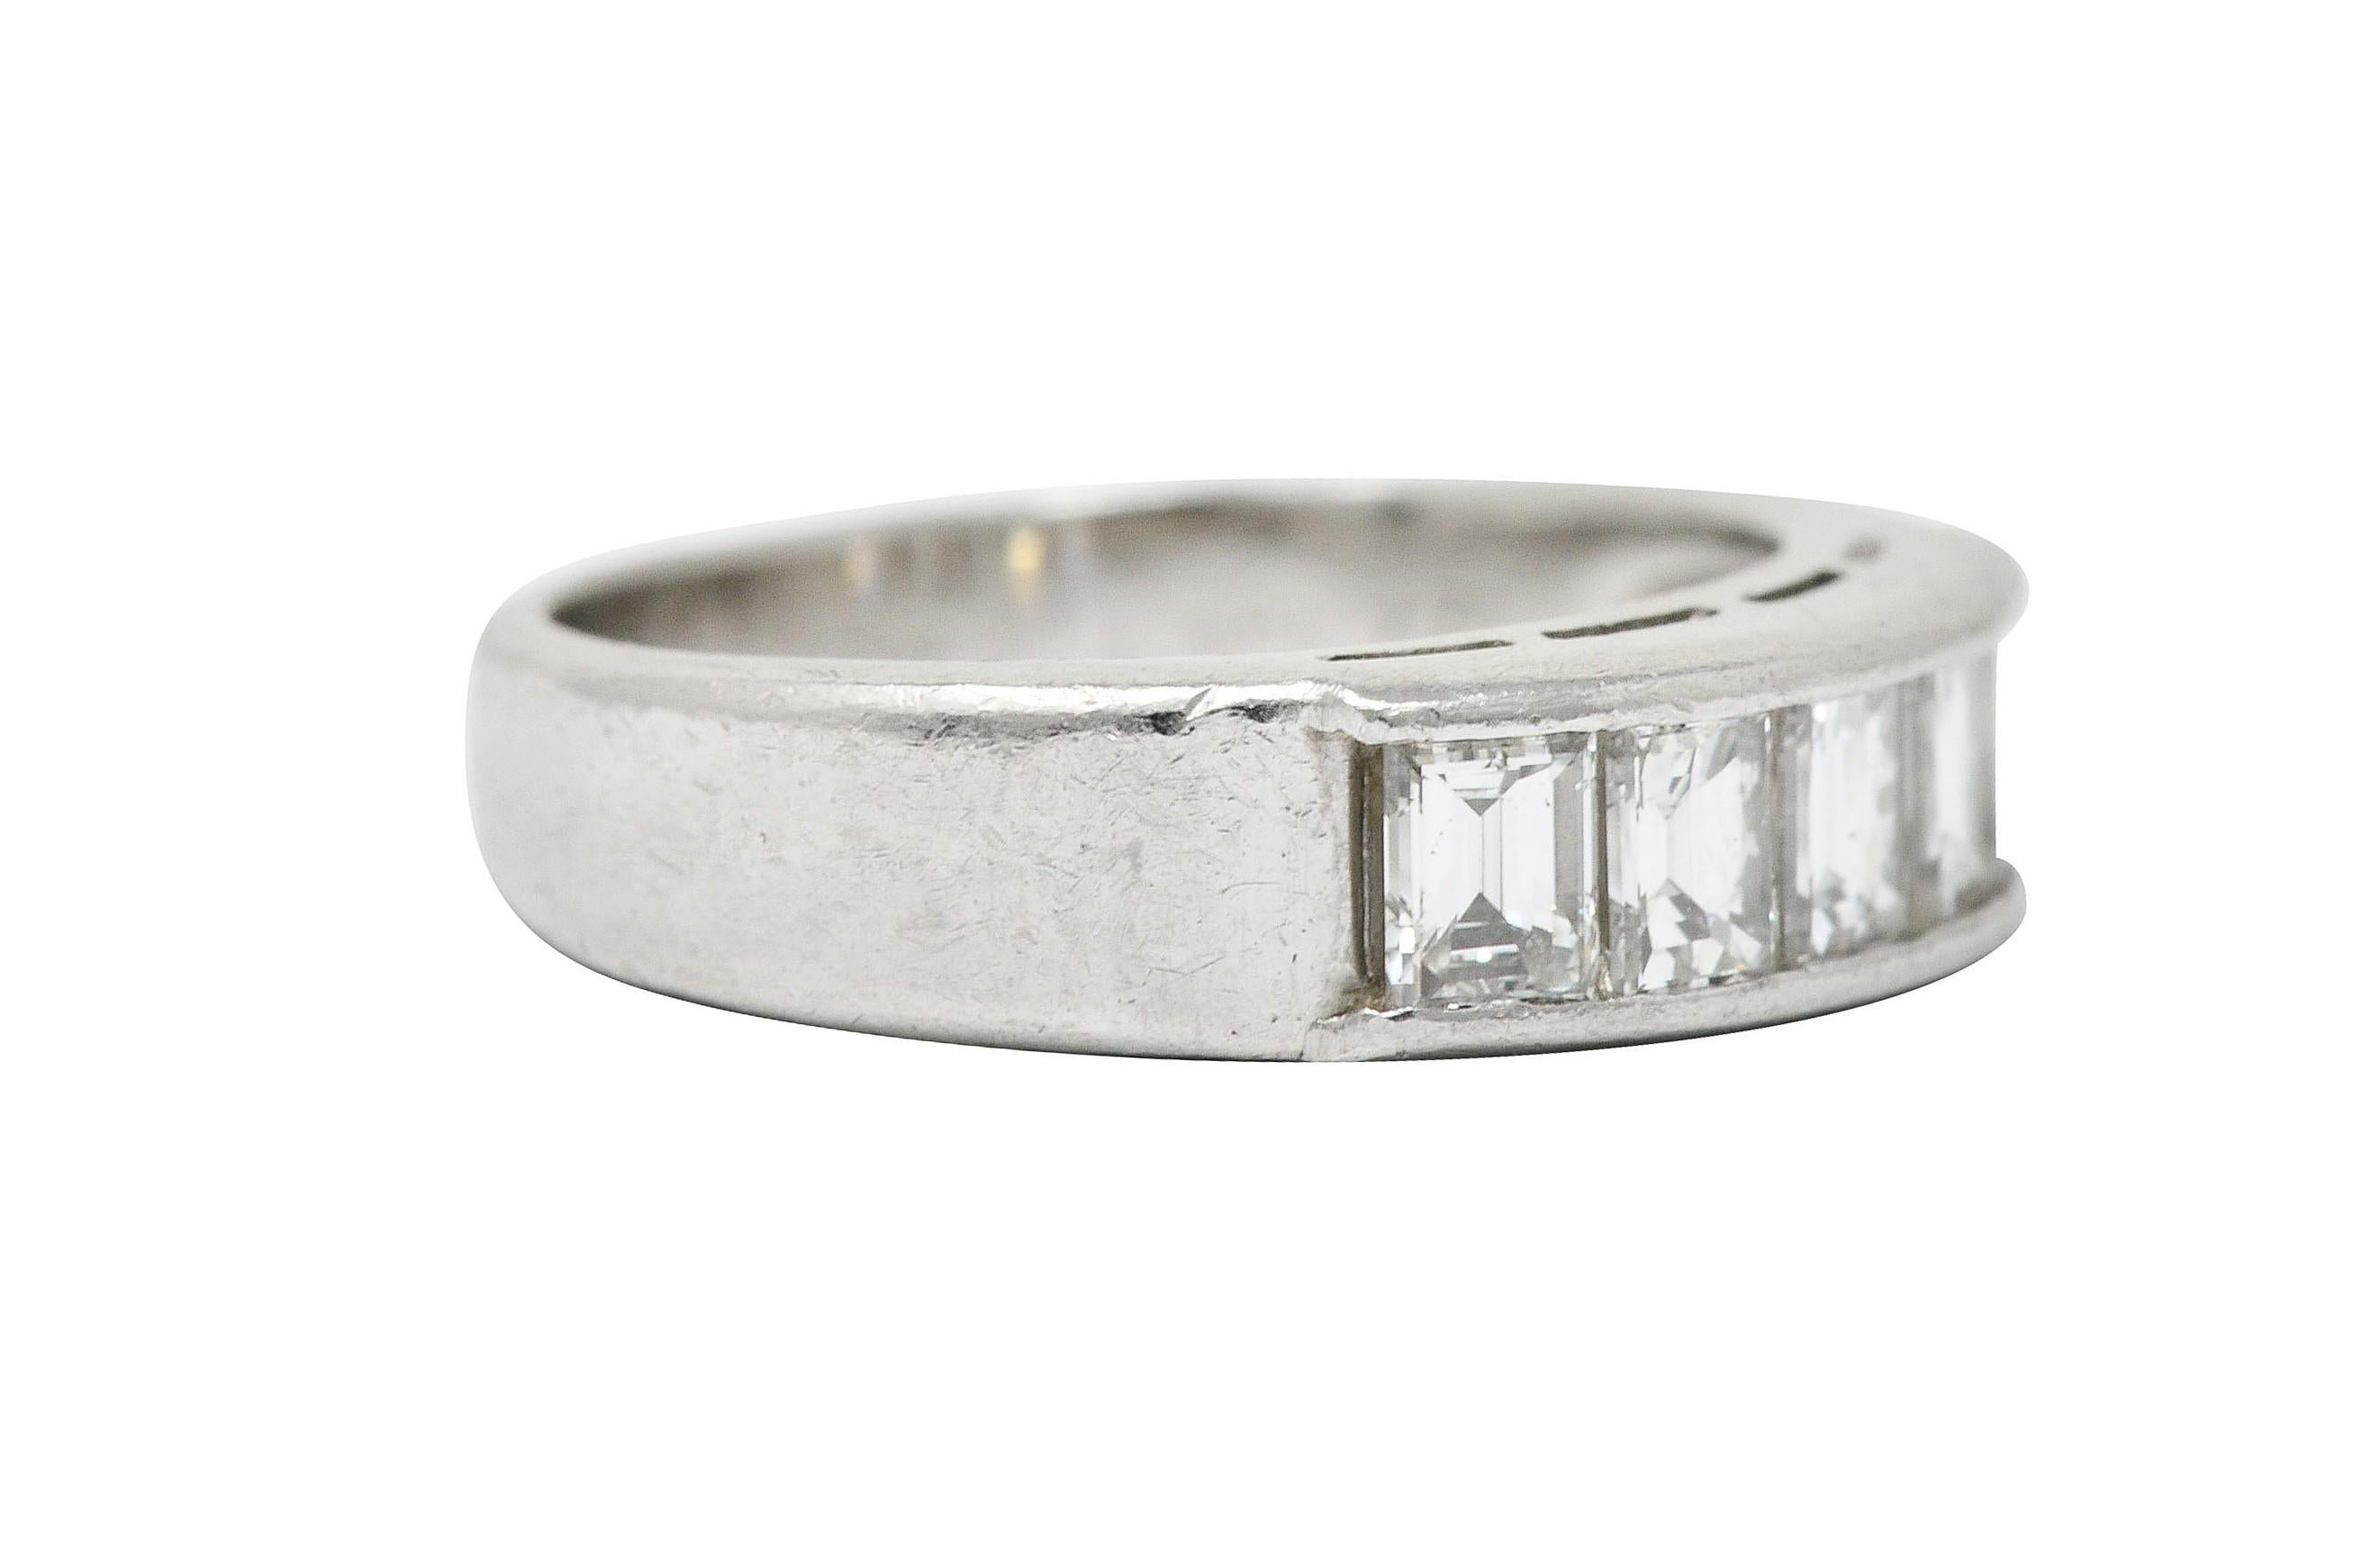 Wide band ring is set to front by five rectangular step cut diamonds

Weighing in total approximately 1.00 carat with H to J color and VS clarity

Stamped Pt900 for platinum

Circa: 2010s

Ring Size: 5 1/4 & sizable

Measures: 5.2 mm wide and sits